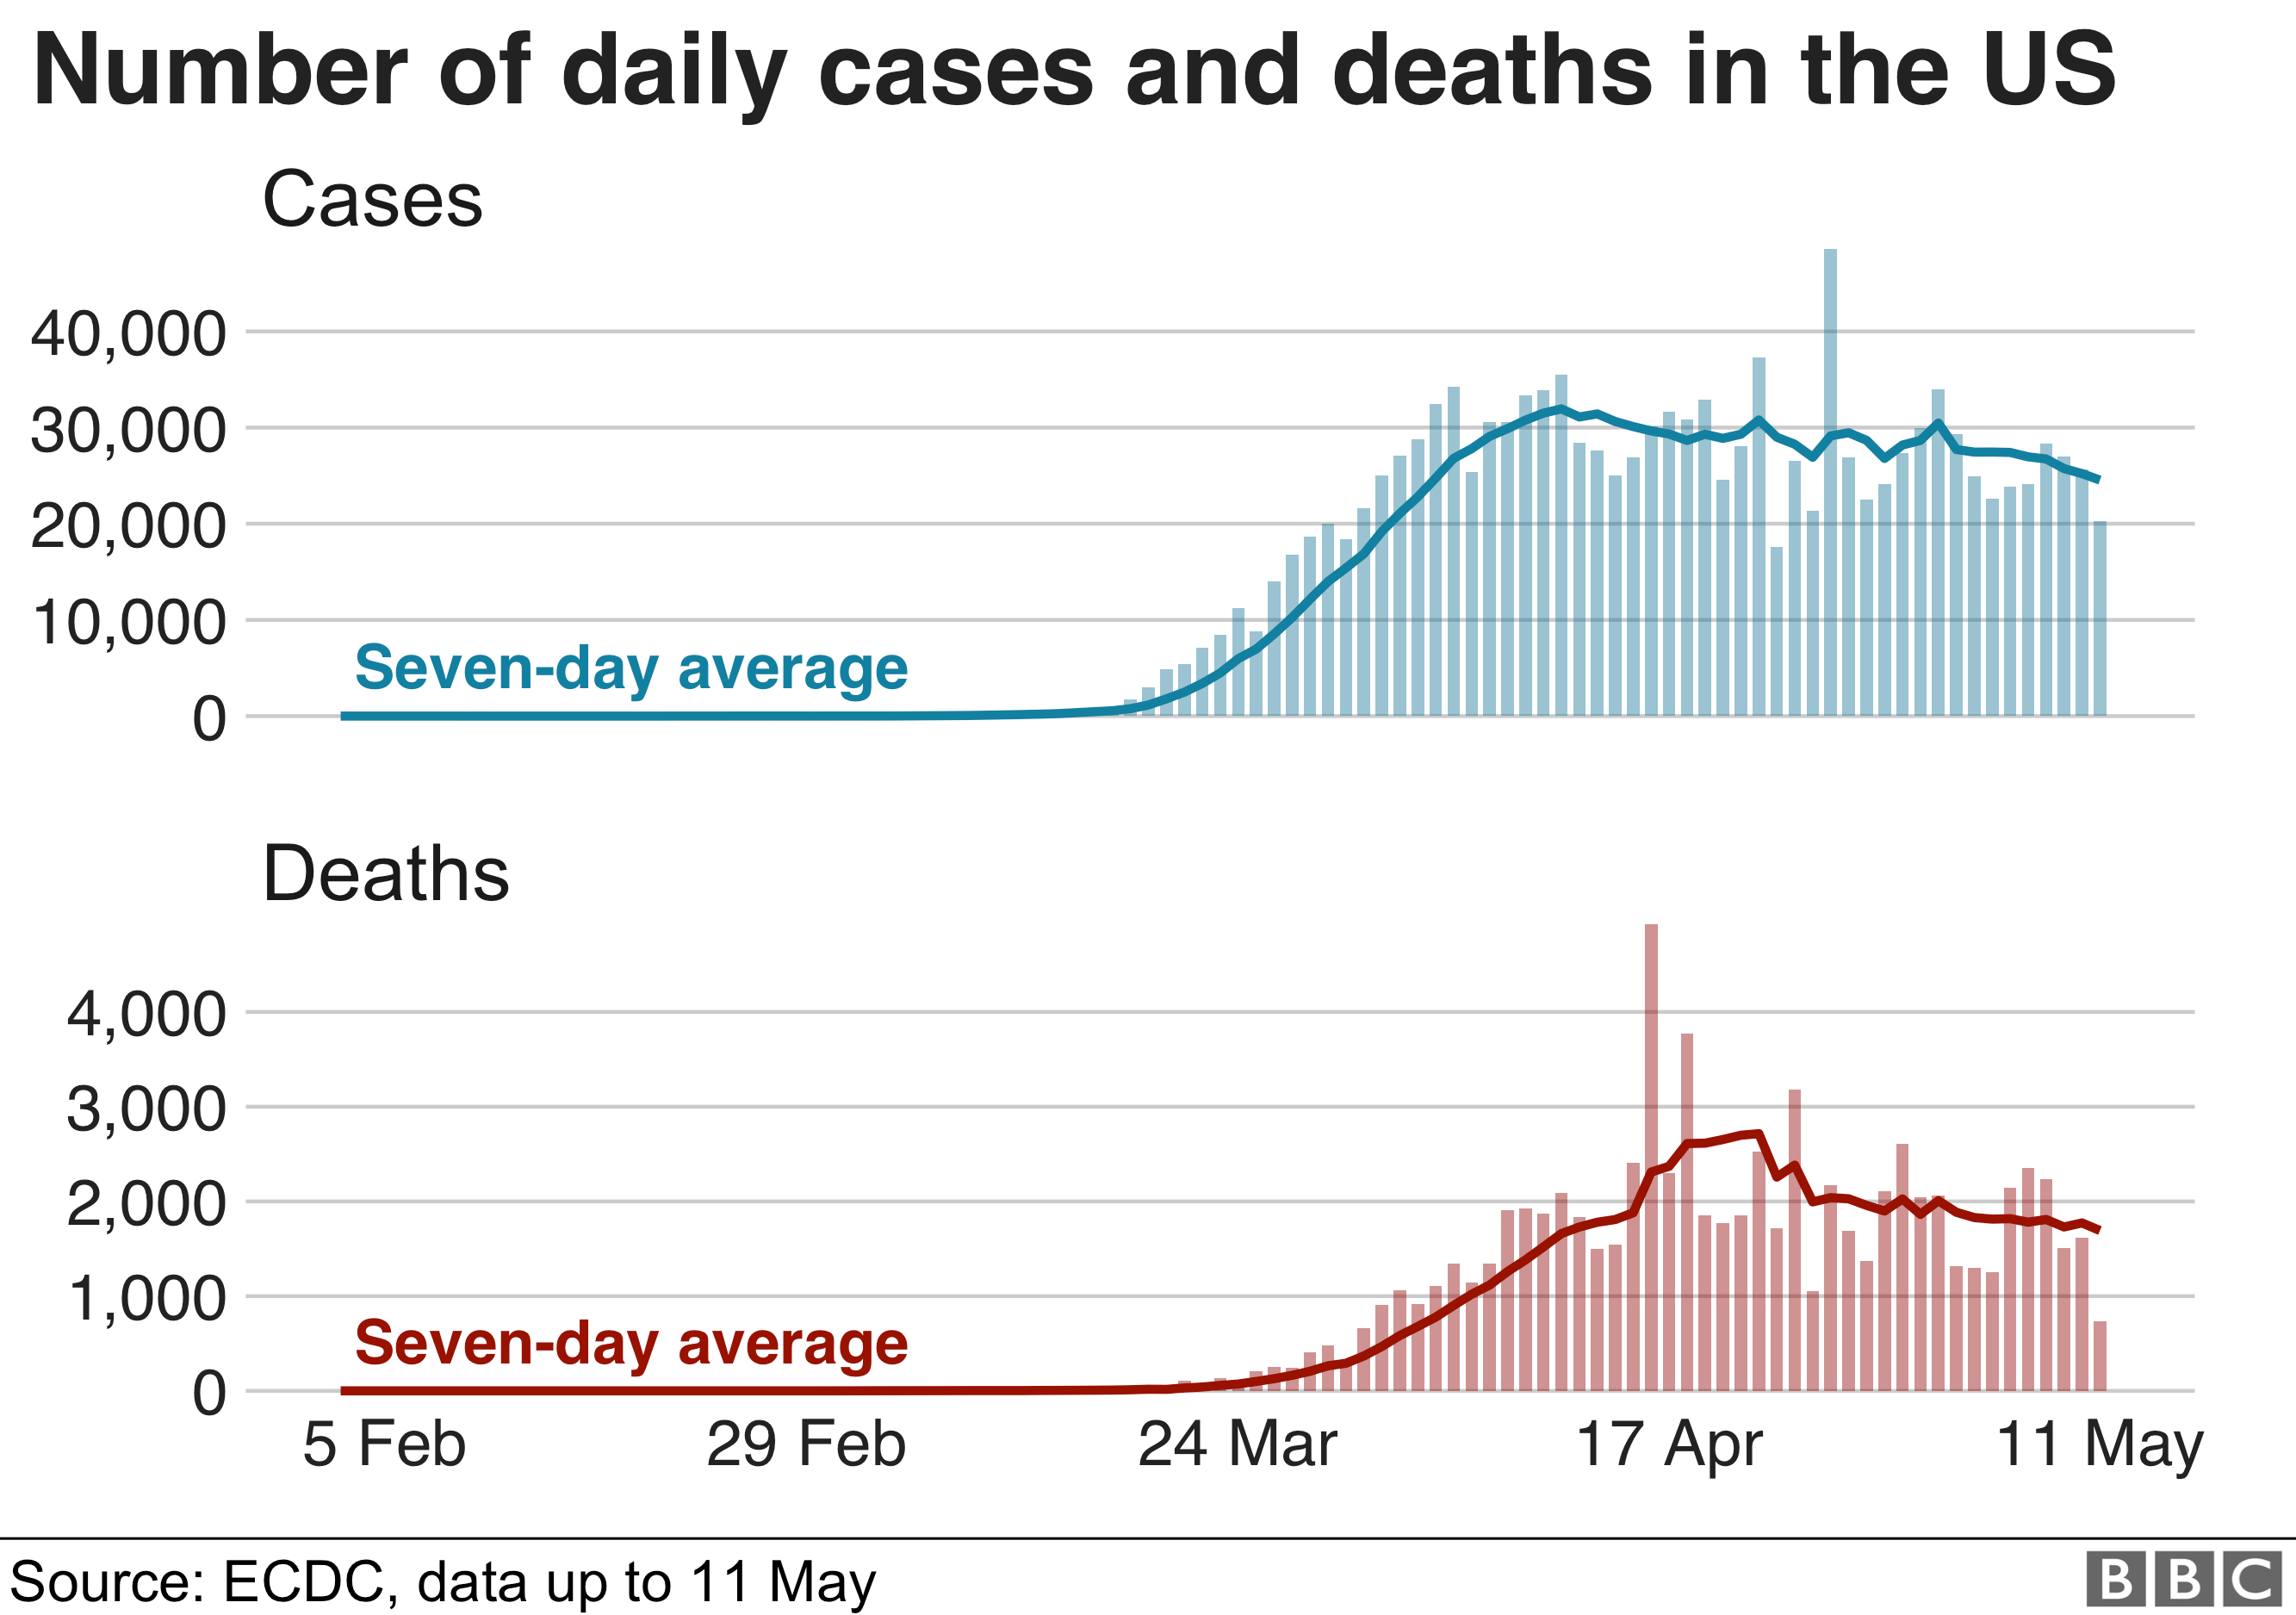 Graph showing the number of daily cases and deaths in the US